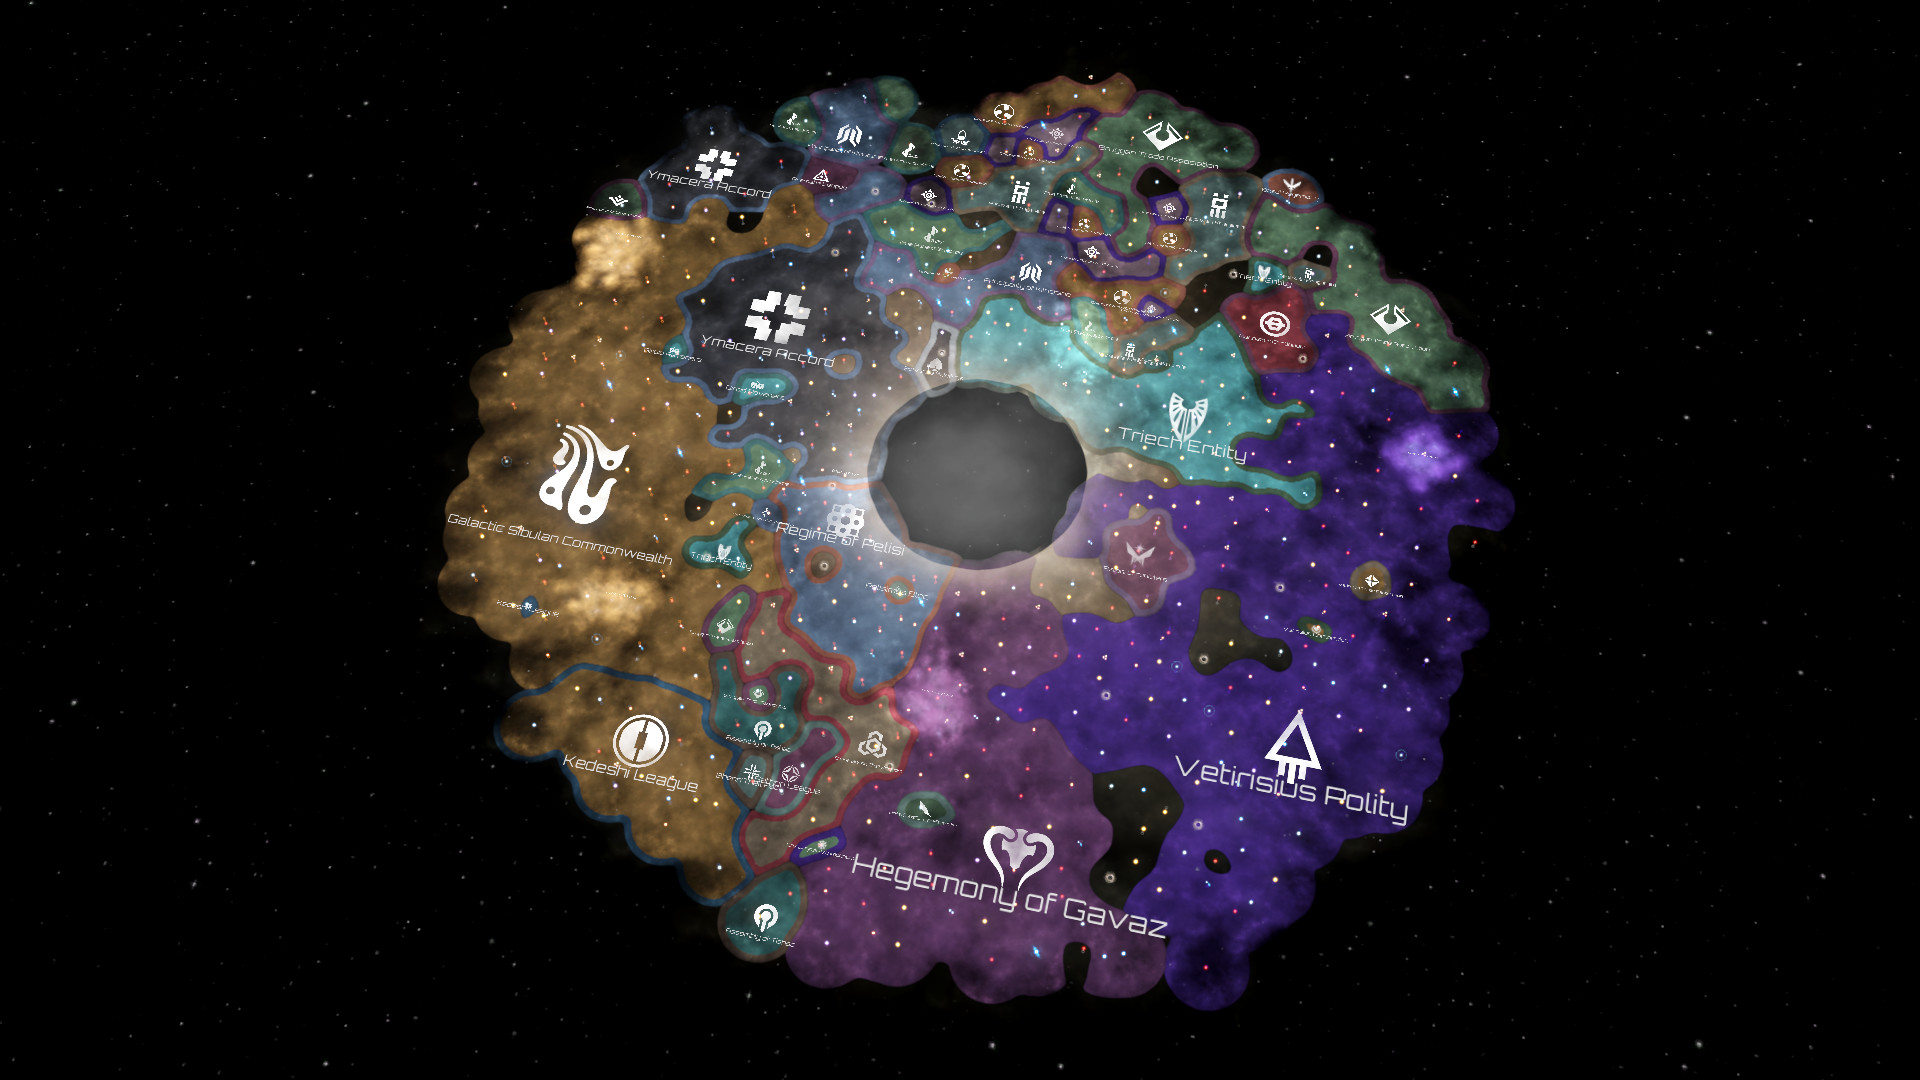 stellaris federations patch notes update 2.6.1